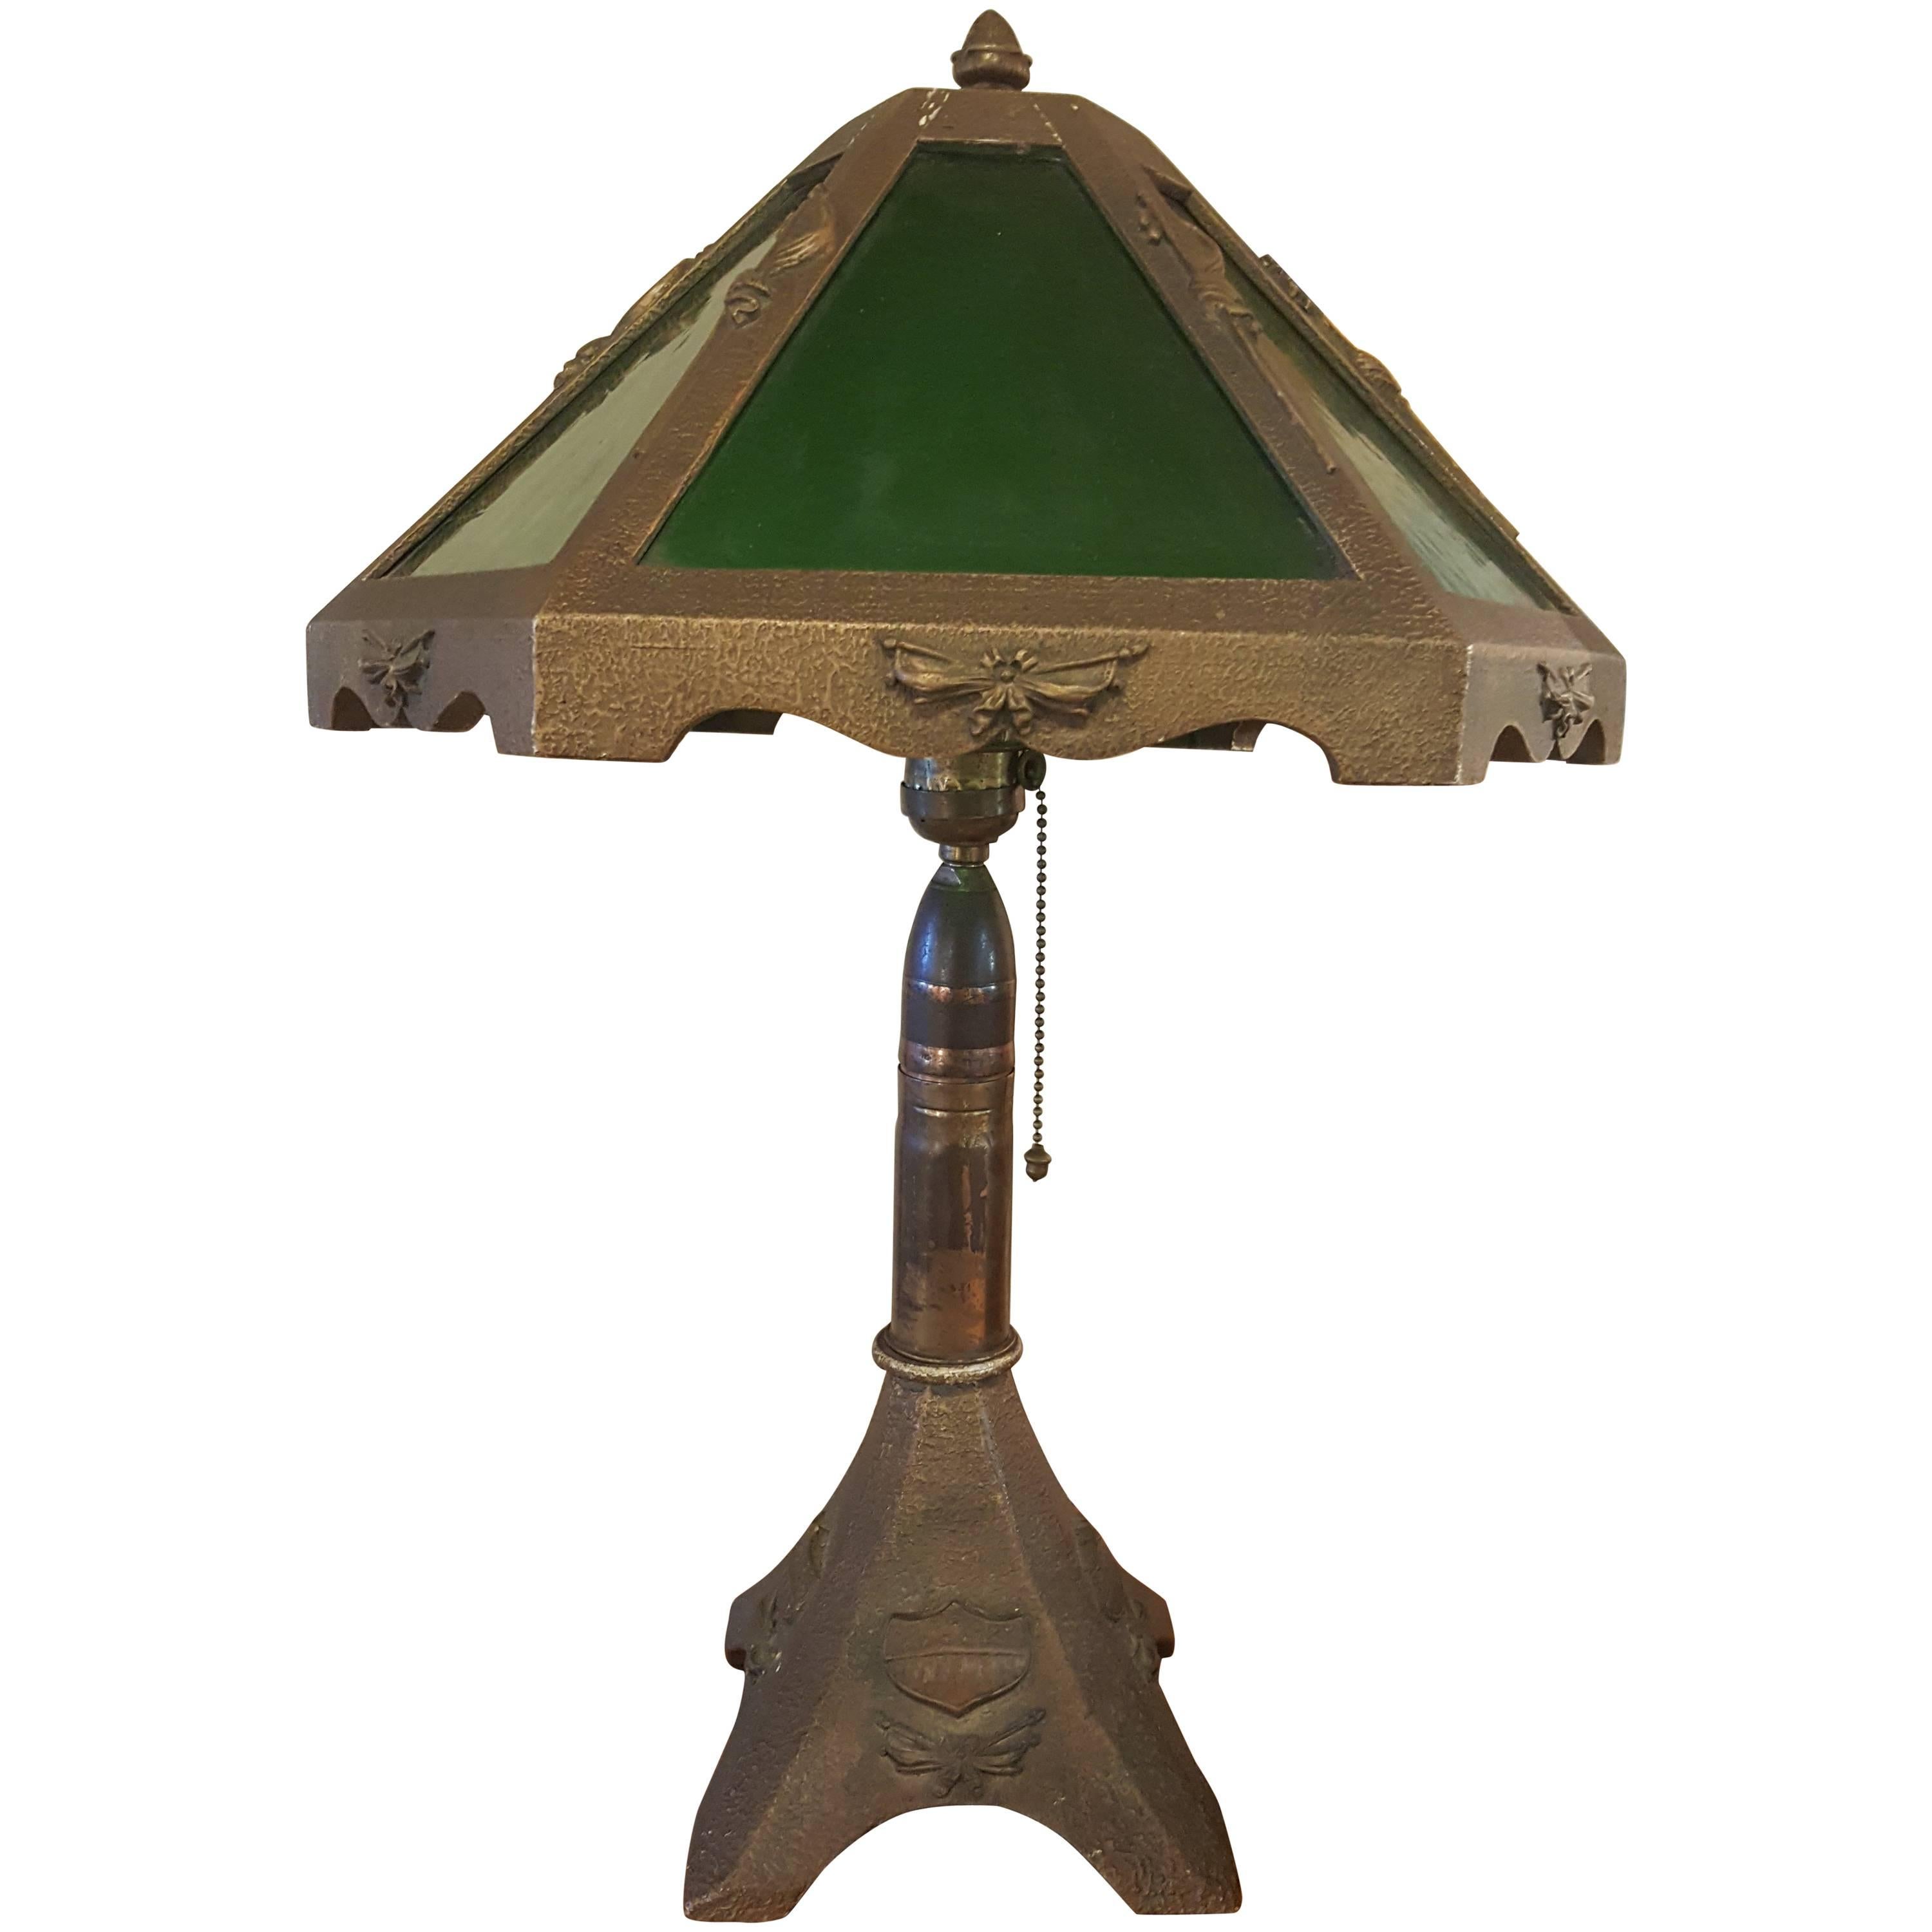 Patriotic WWI Trench Art Table Lamp